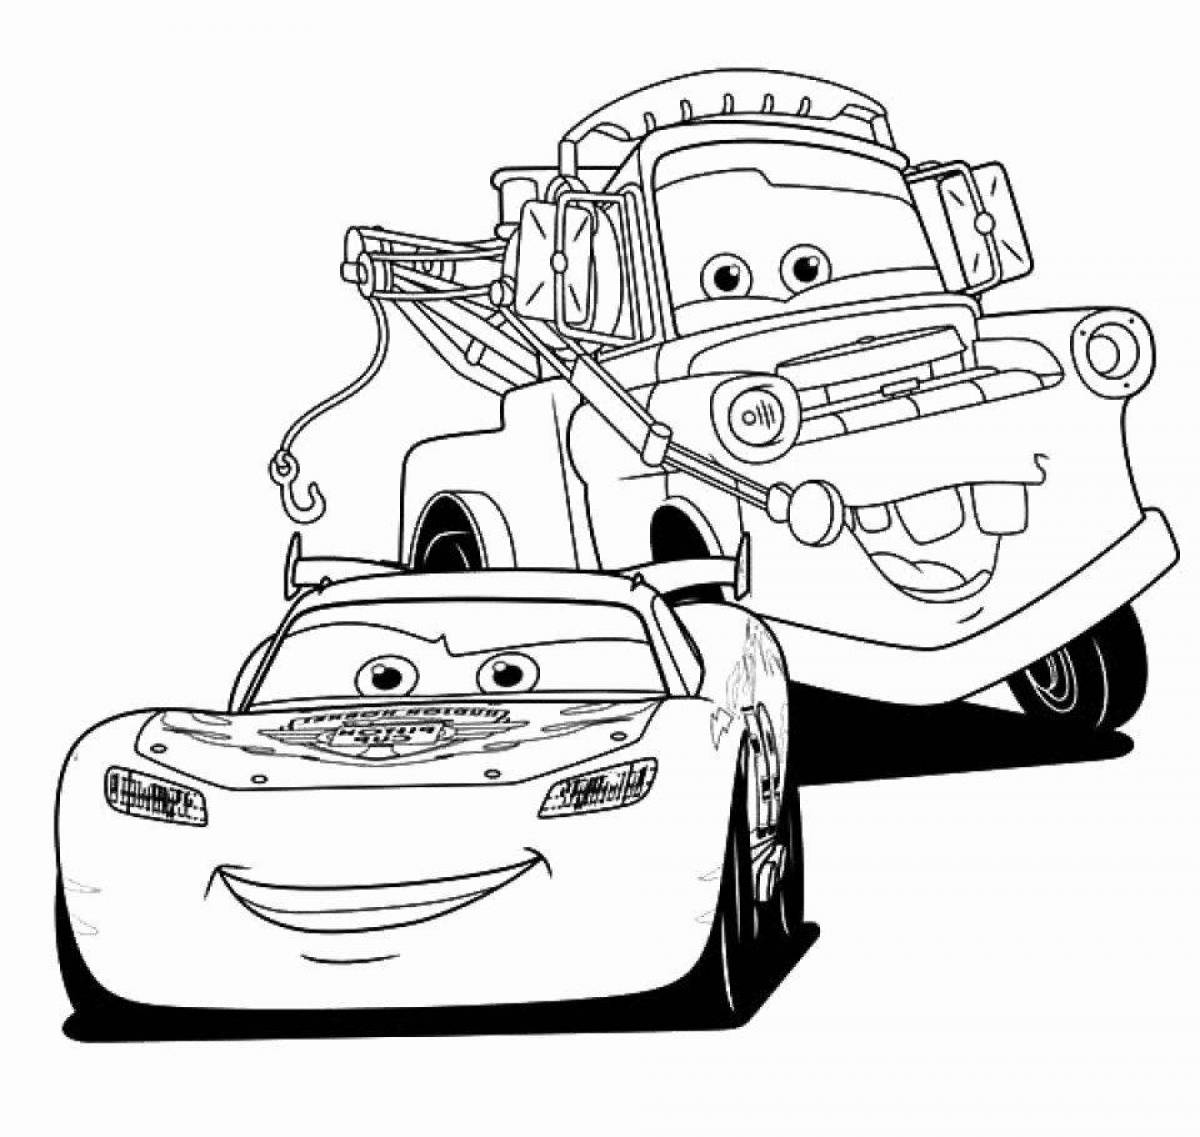 Lightning mcqueen colorful coloring book